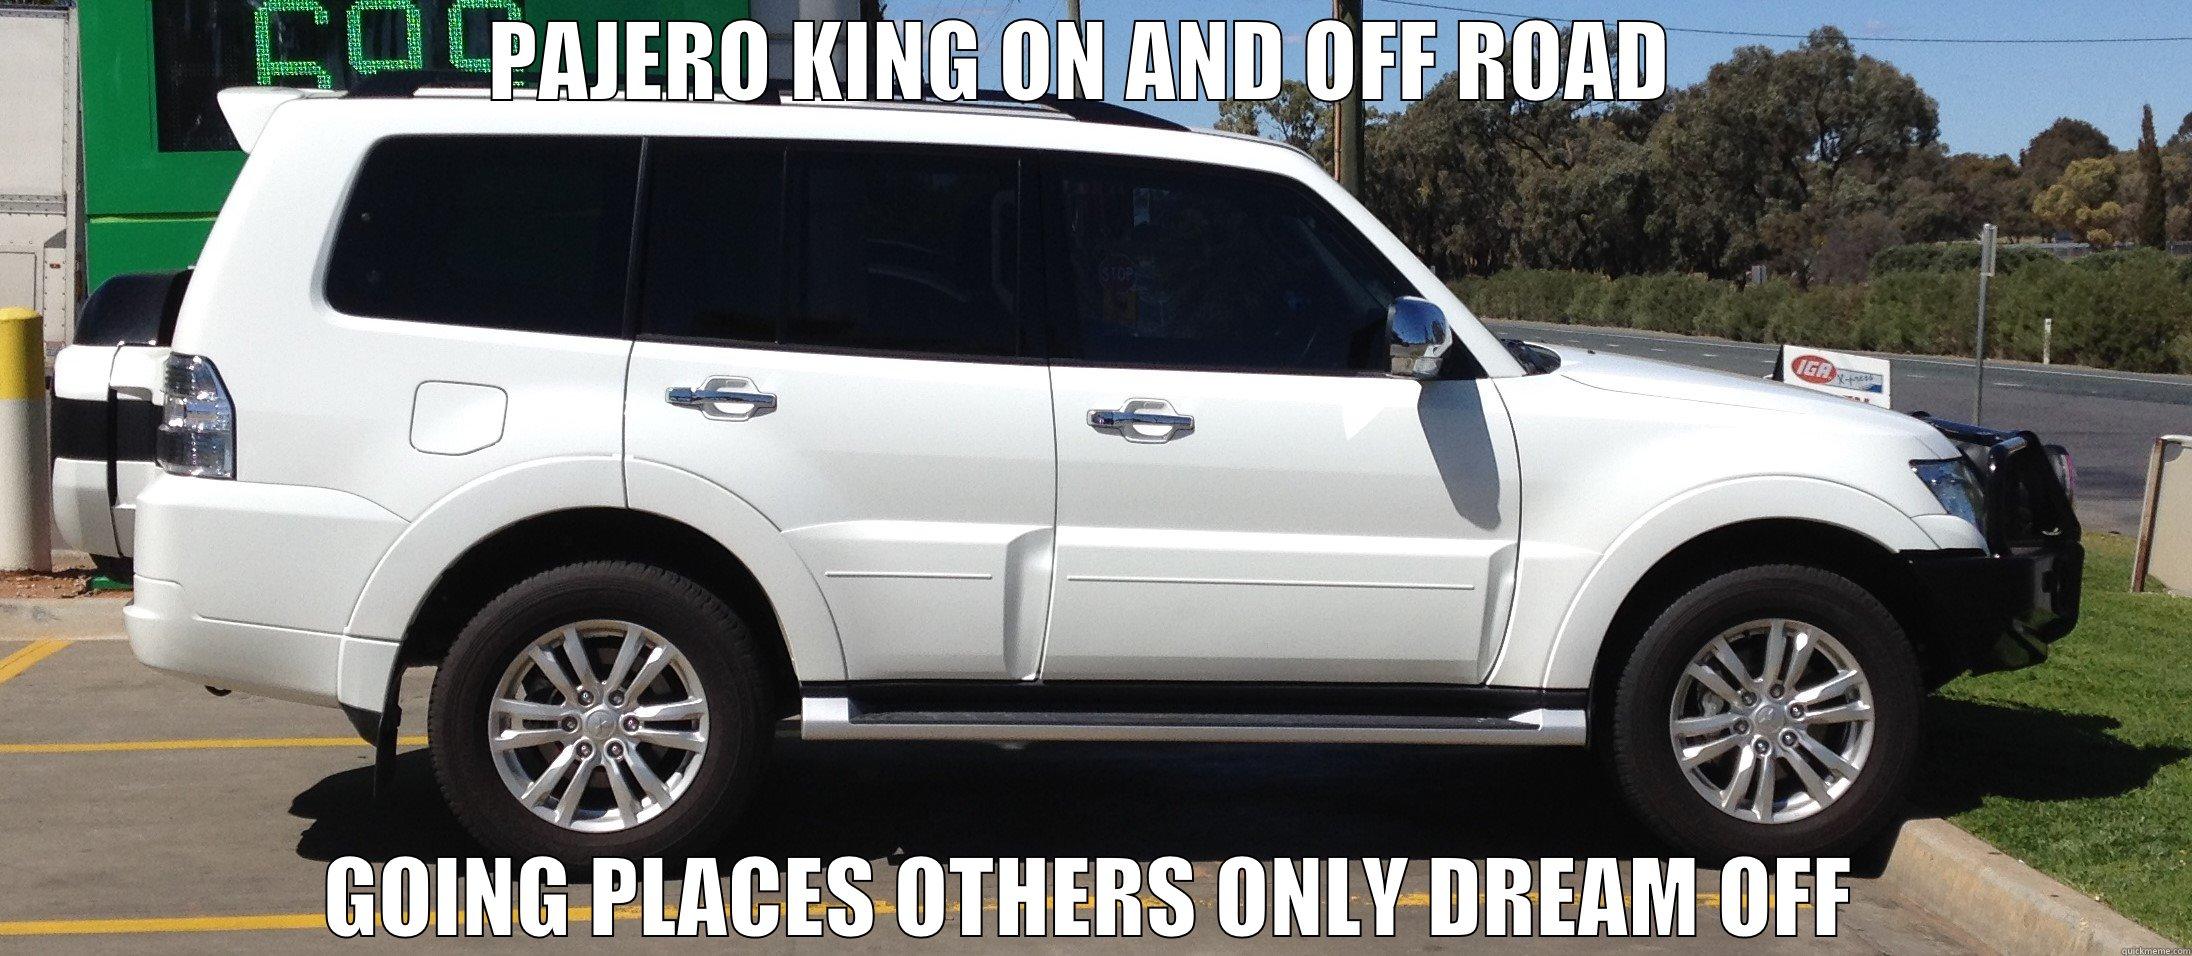 PAJERO KING  - PAJERO KING ON AND OFF ROAD  GOING PLACES OTHERS ONLY DREAM OFF Misc